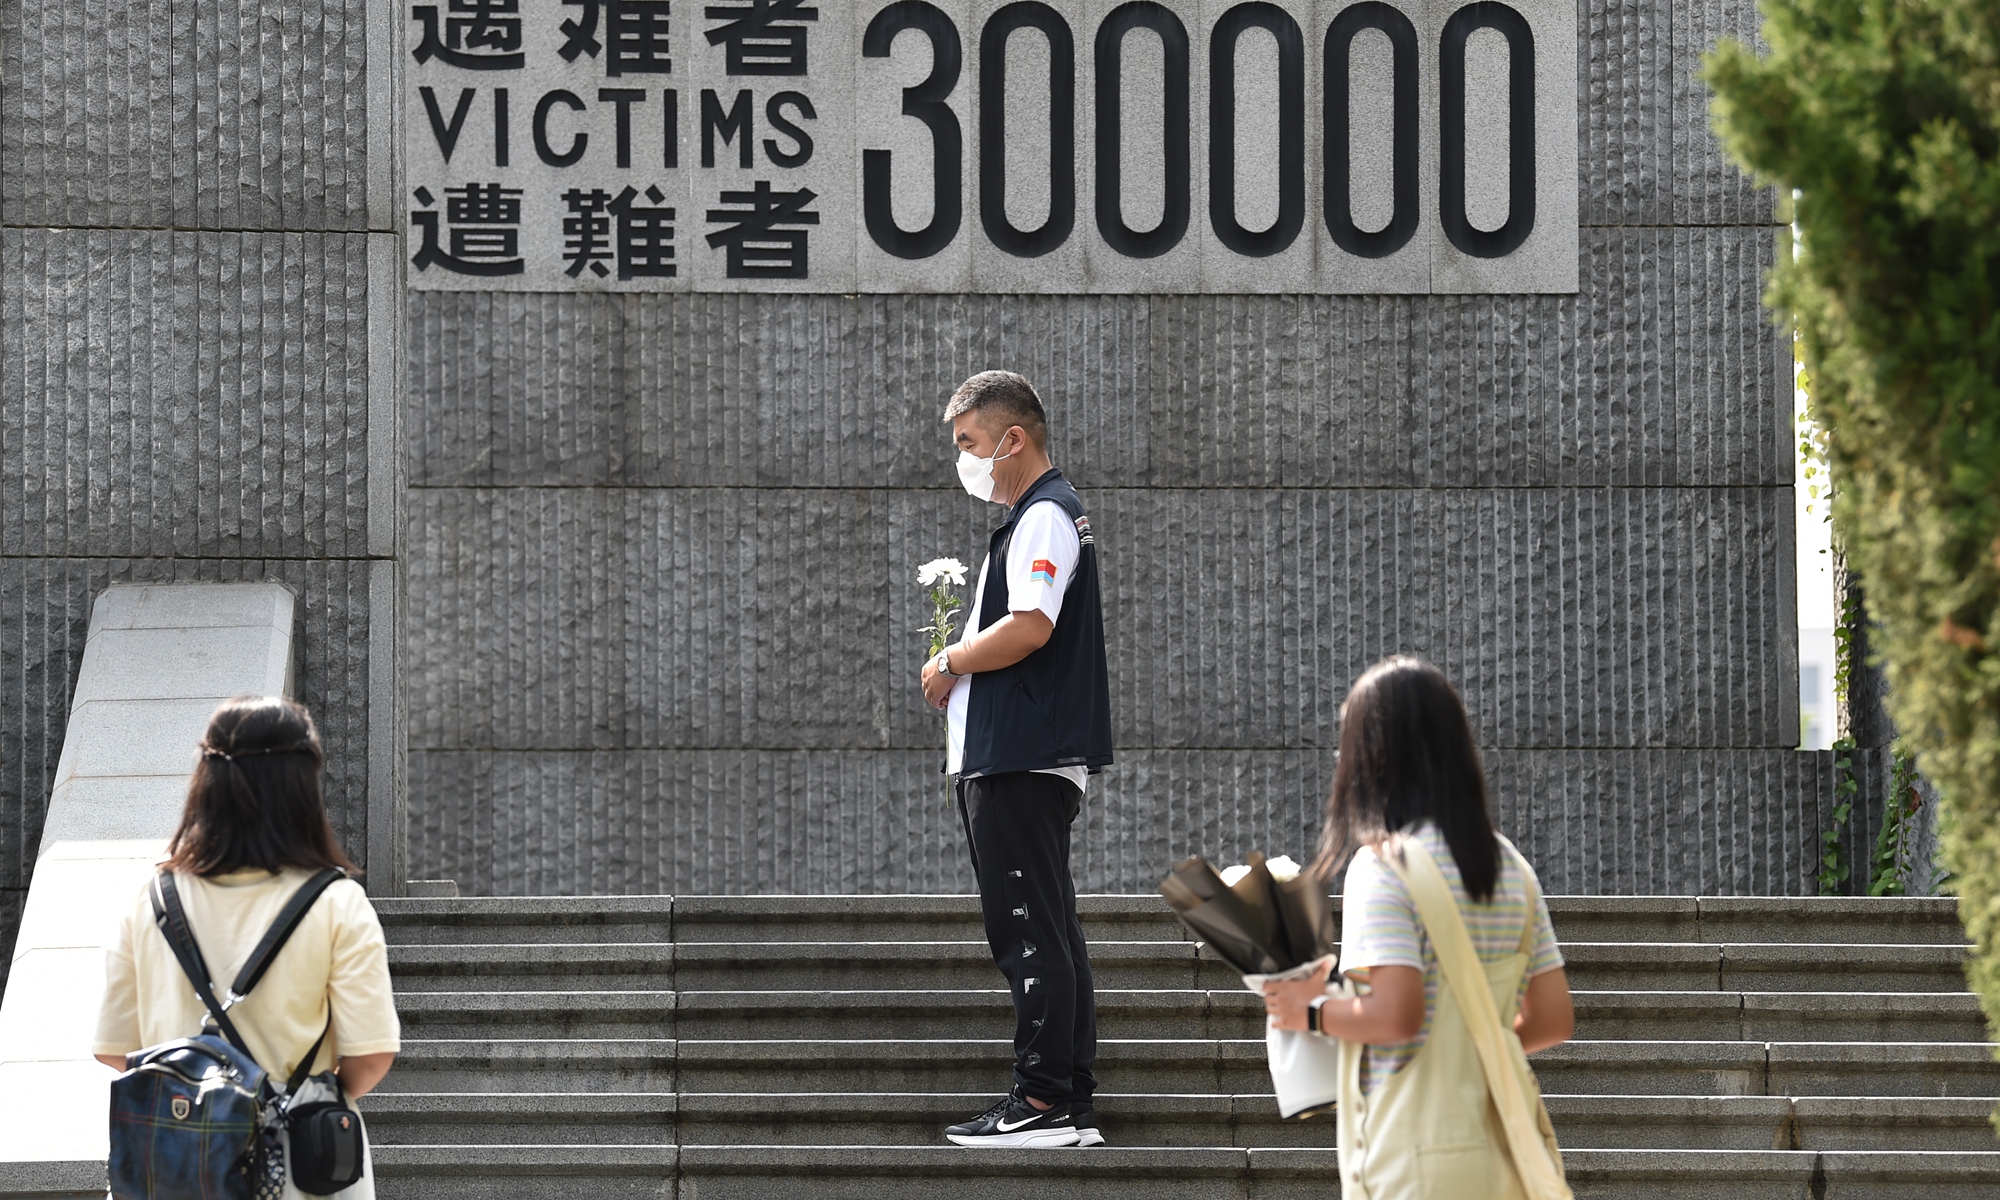 
Visitors stand in silence as sirens sound at the Memorial Hall for the Victims in Nanjing Massacre by Japanese Invaders in Nanjing, capital of East China's Jiangsu Province on Sept 18, 2022 to mark the 91st anniversary of the September 18 incident. Photo: VCG